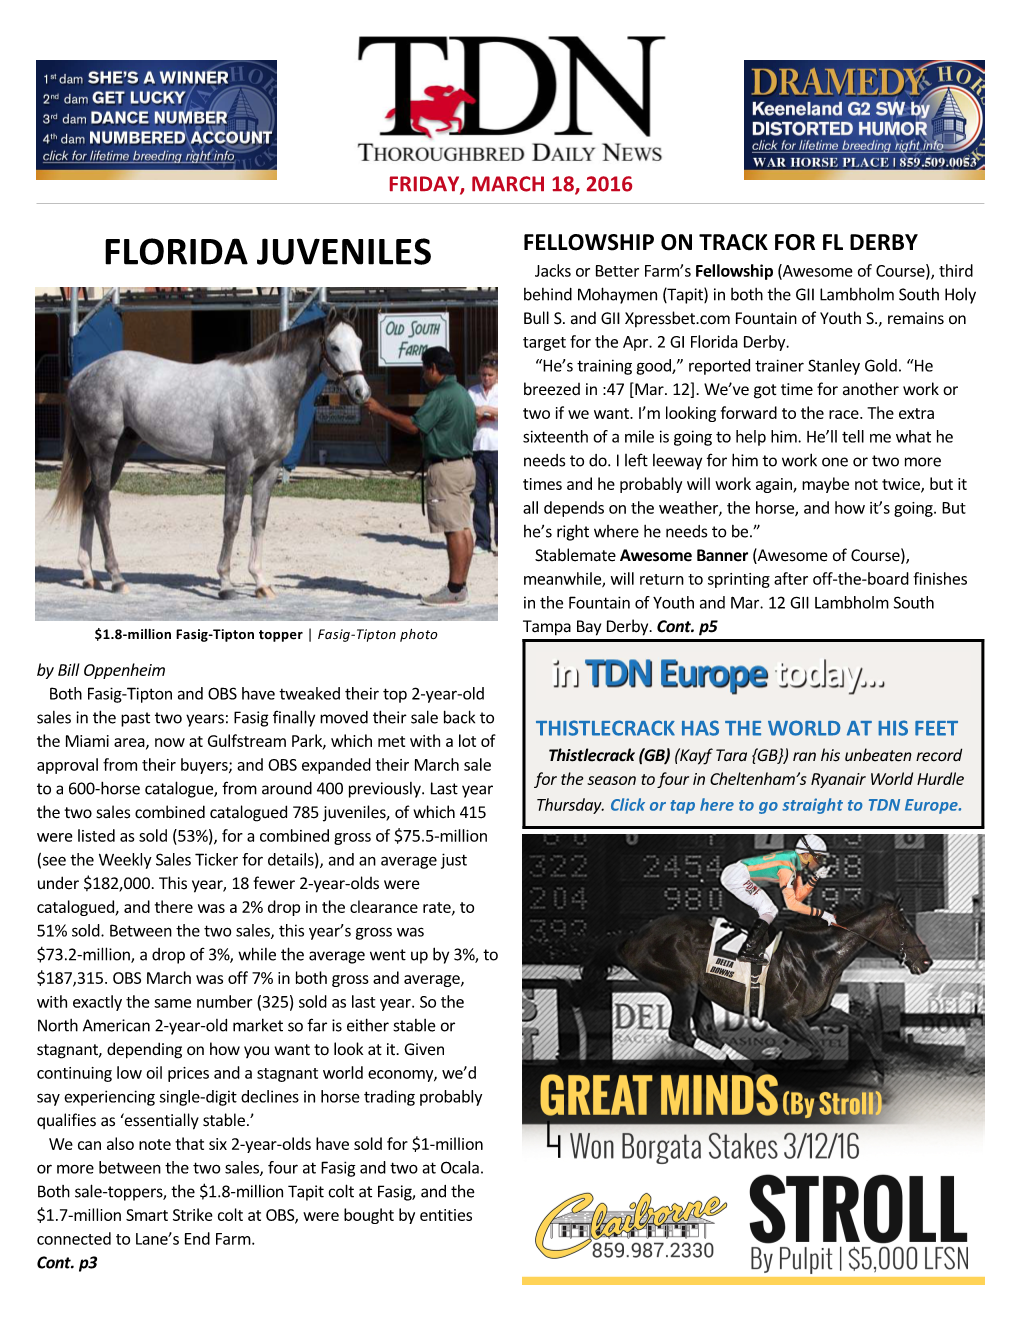 FLORIDA JUVENILES Jacks Or Better Farm’S Fellowship (Awesome of Course), Third Behind Mohaymen (Tapit) in Both the GII Lambholm South Holy Bull S